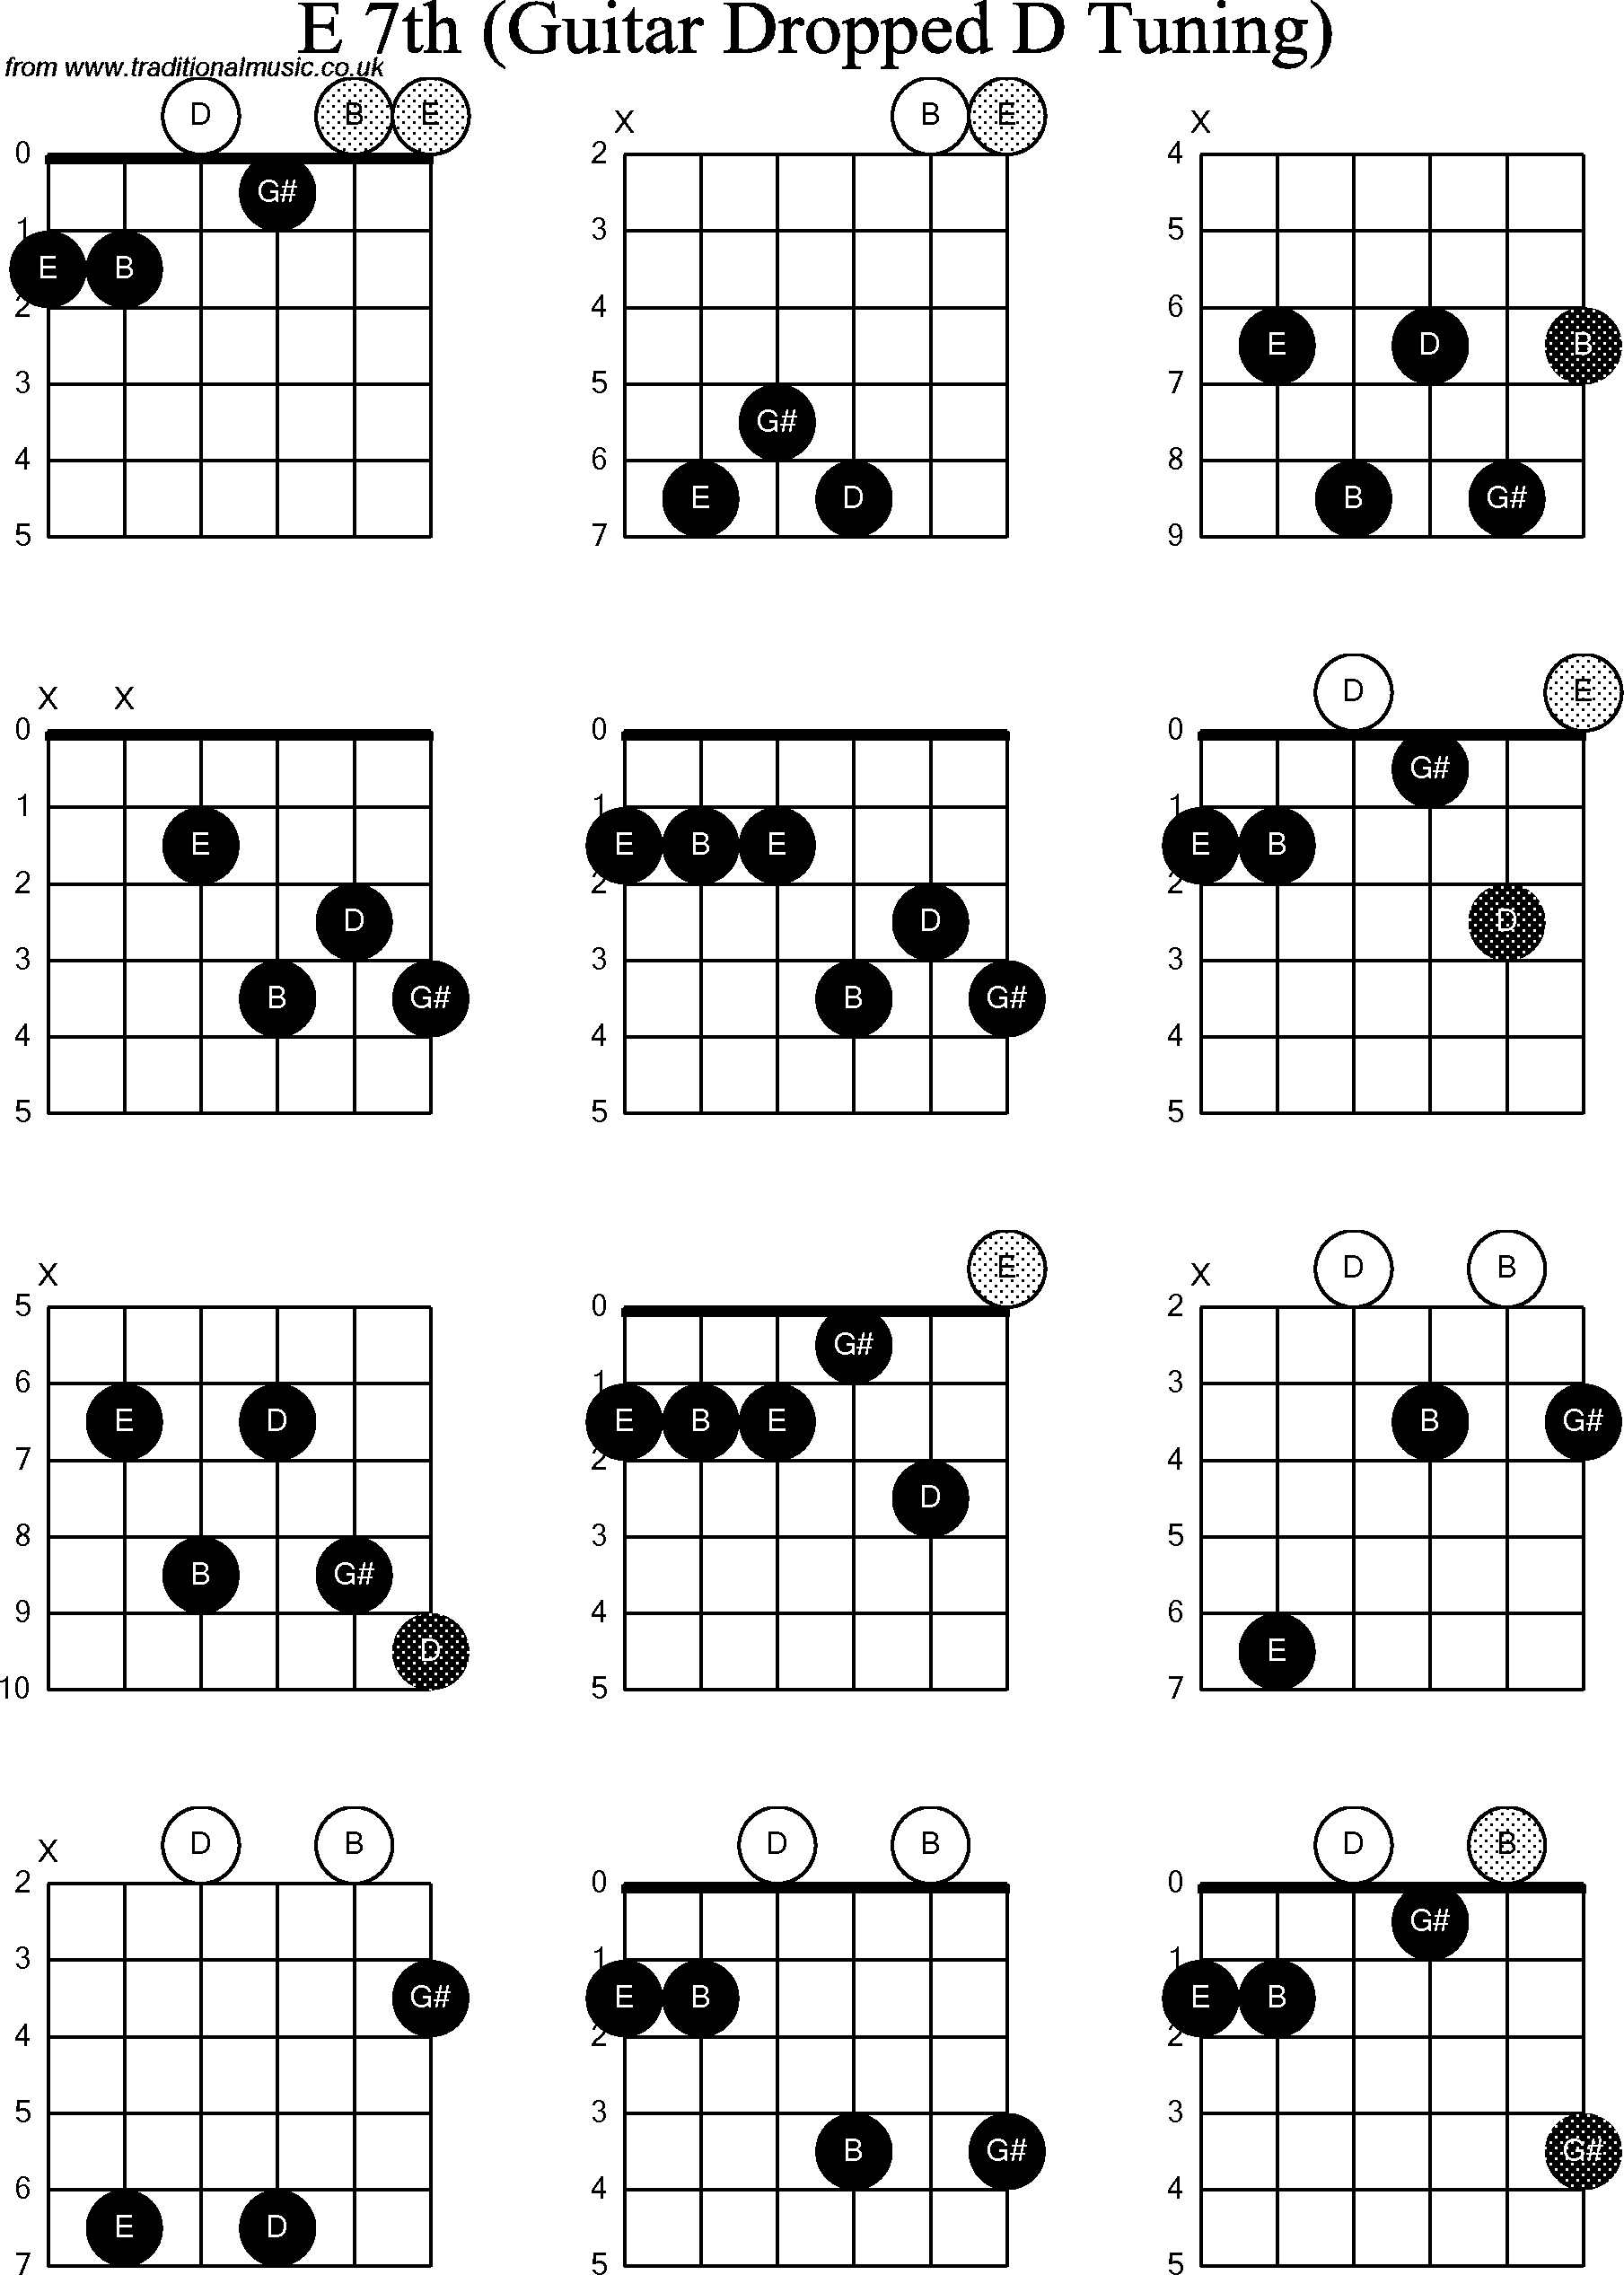 Chord diagrams for dropped D Guitar(DADGBE), E7th